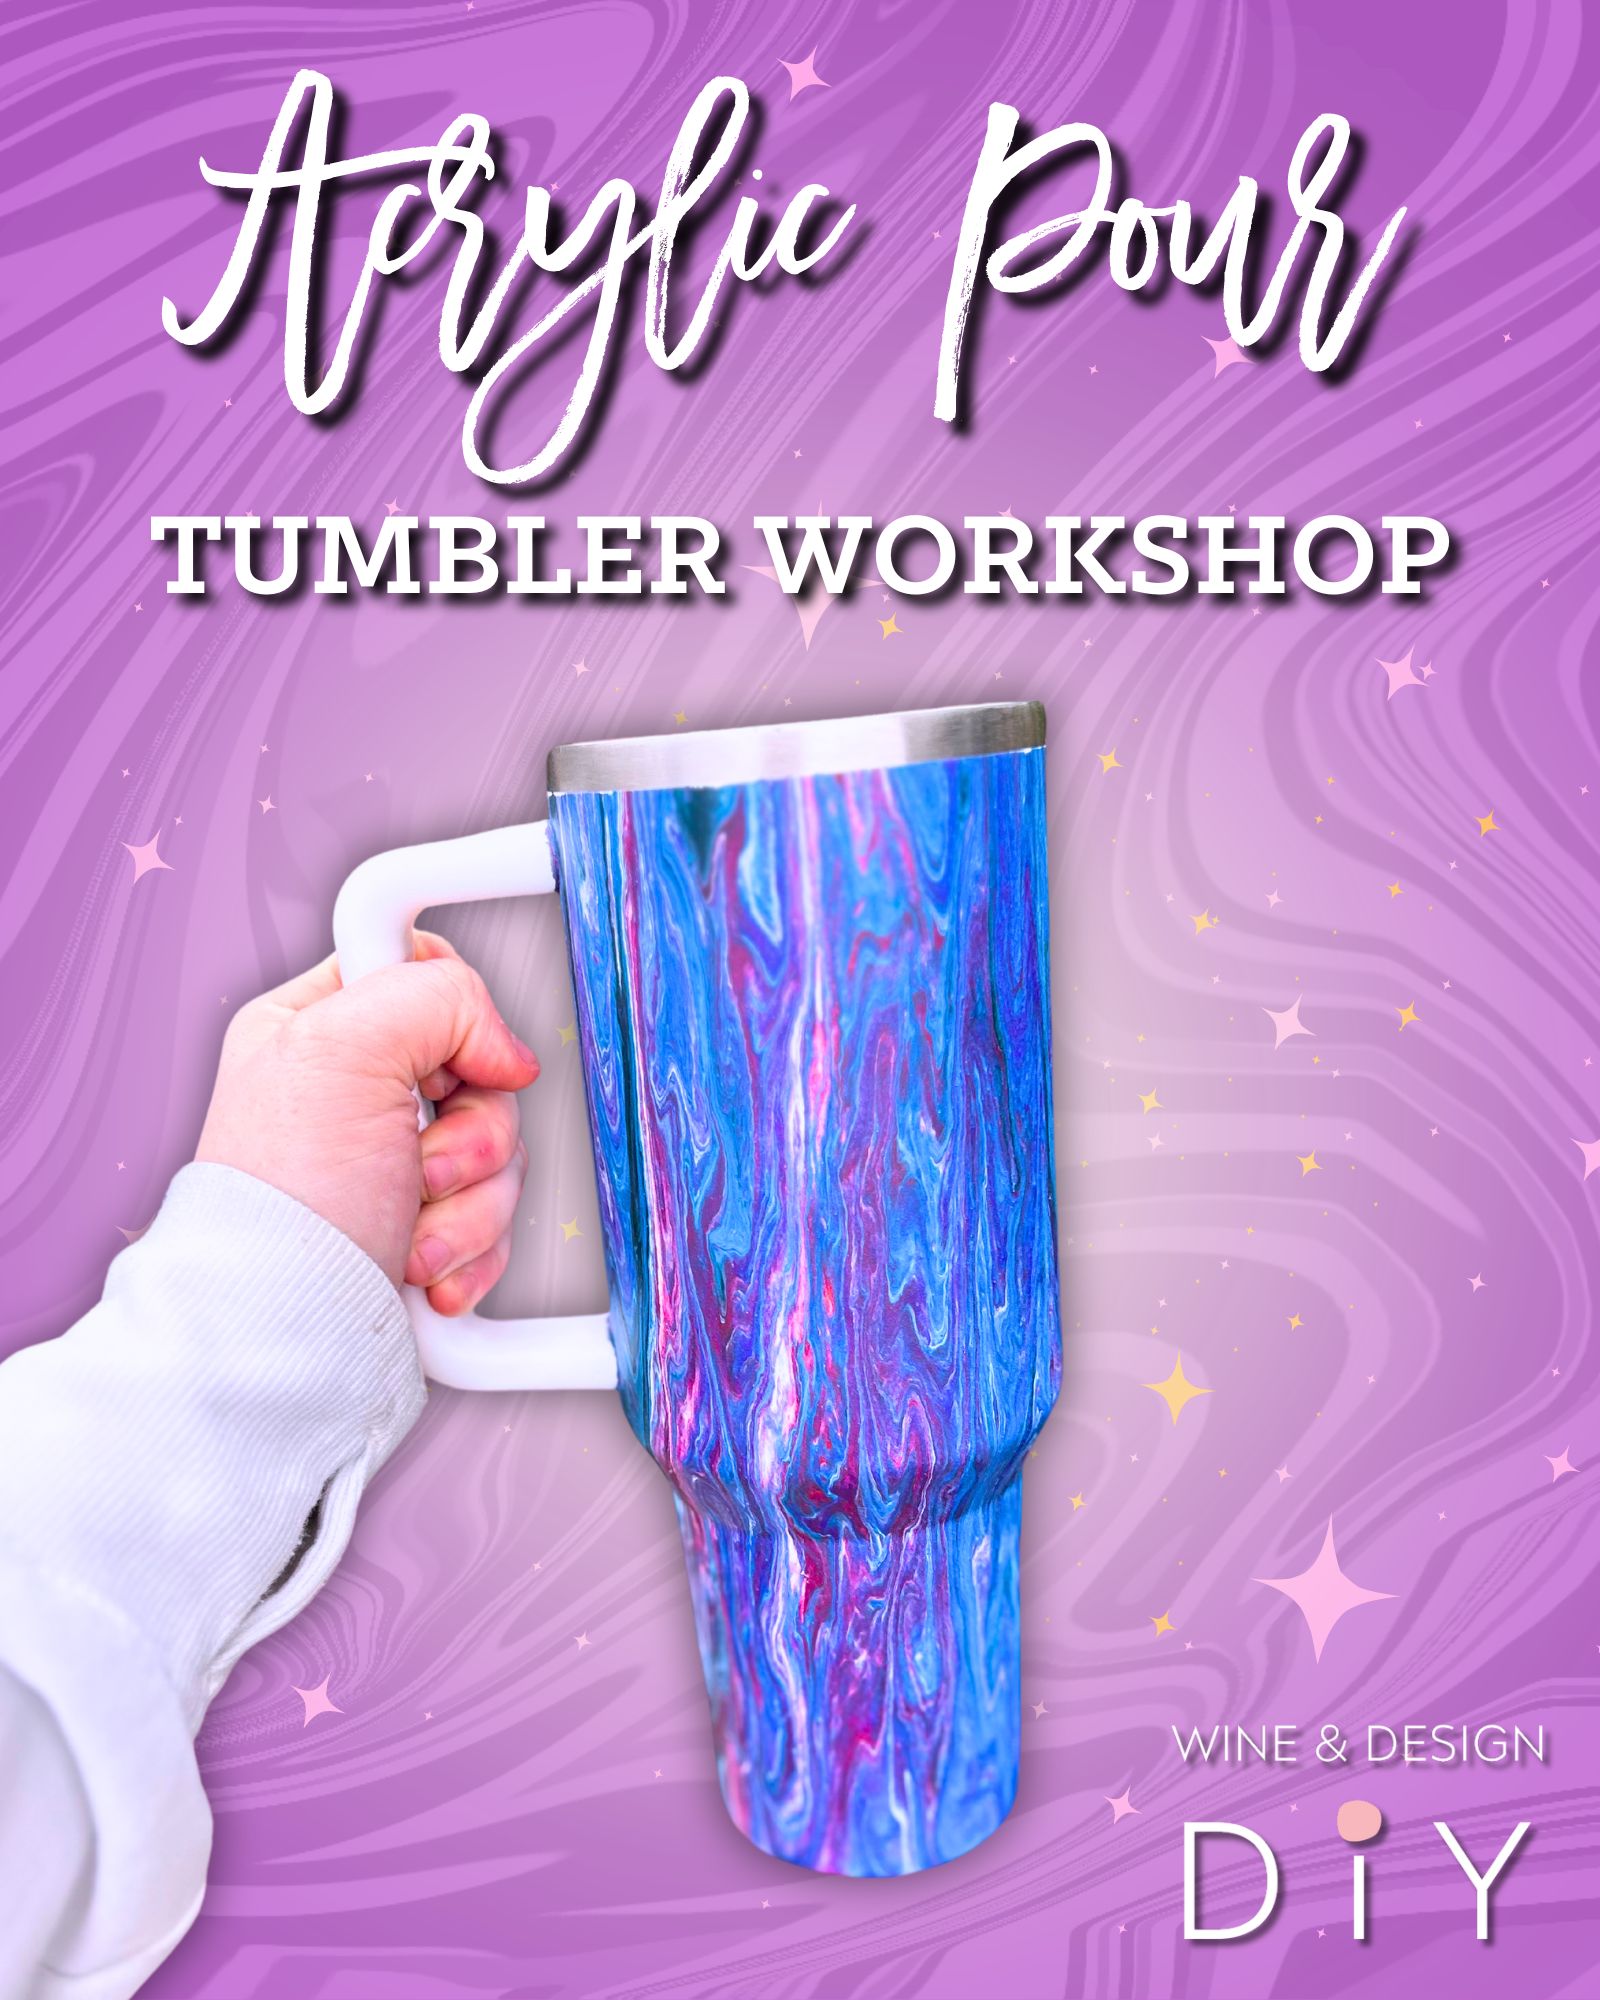 NEW! Acrylic Pour Tumbler! Choose ANY Colors! 12:00pm